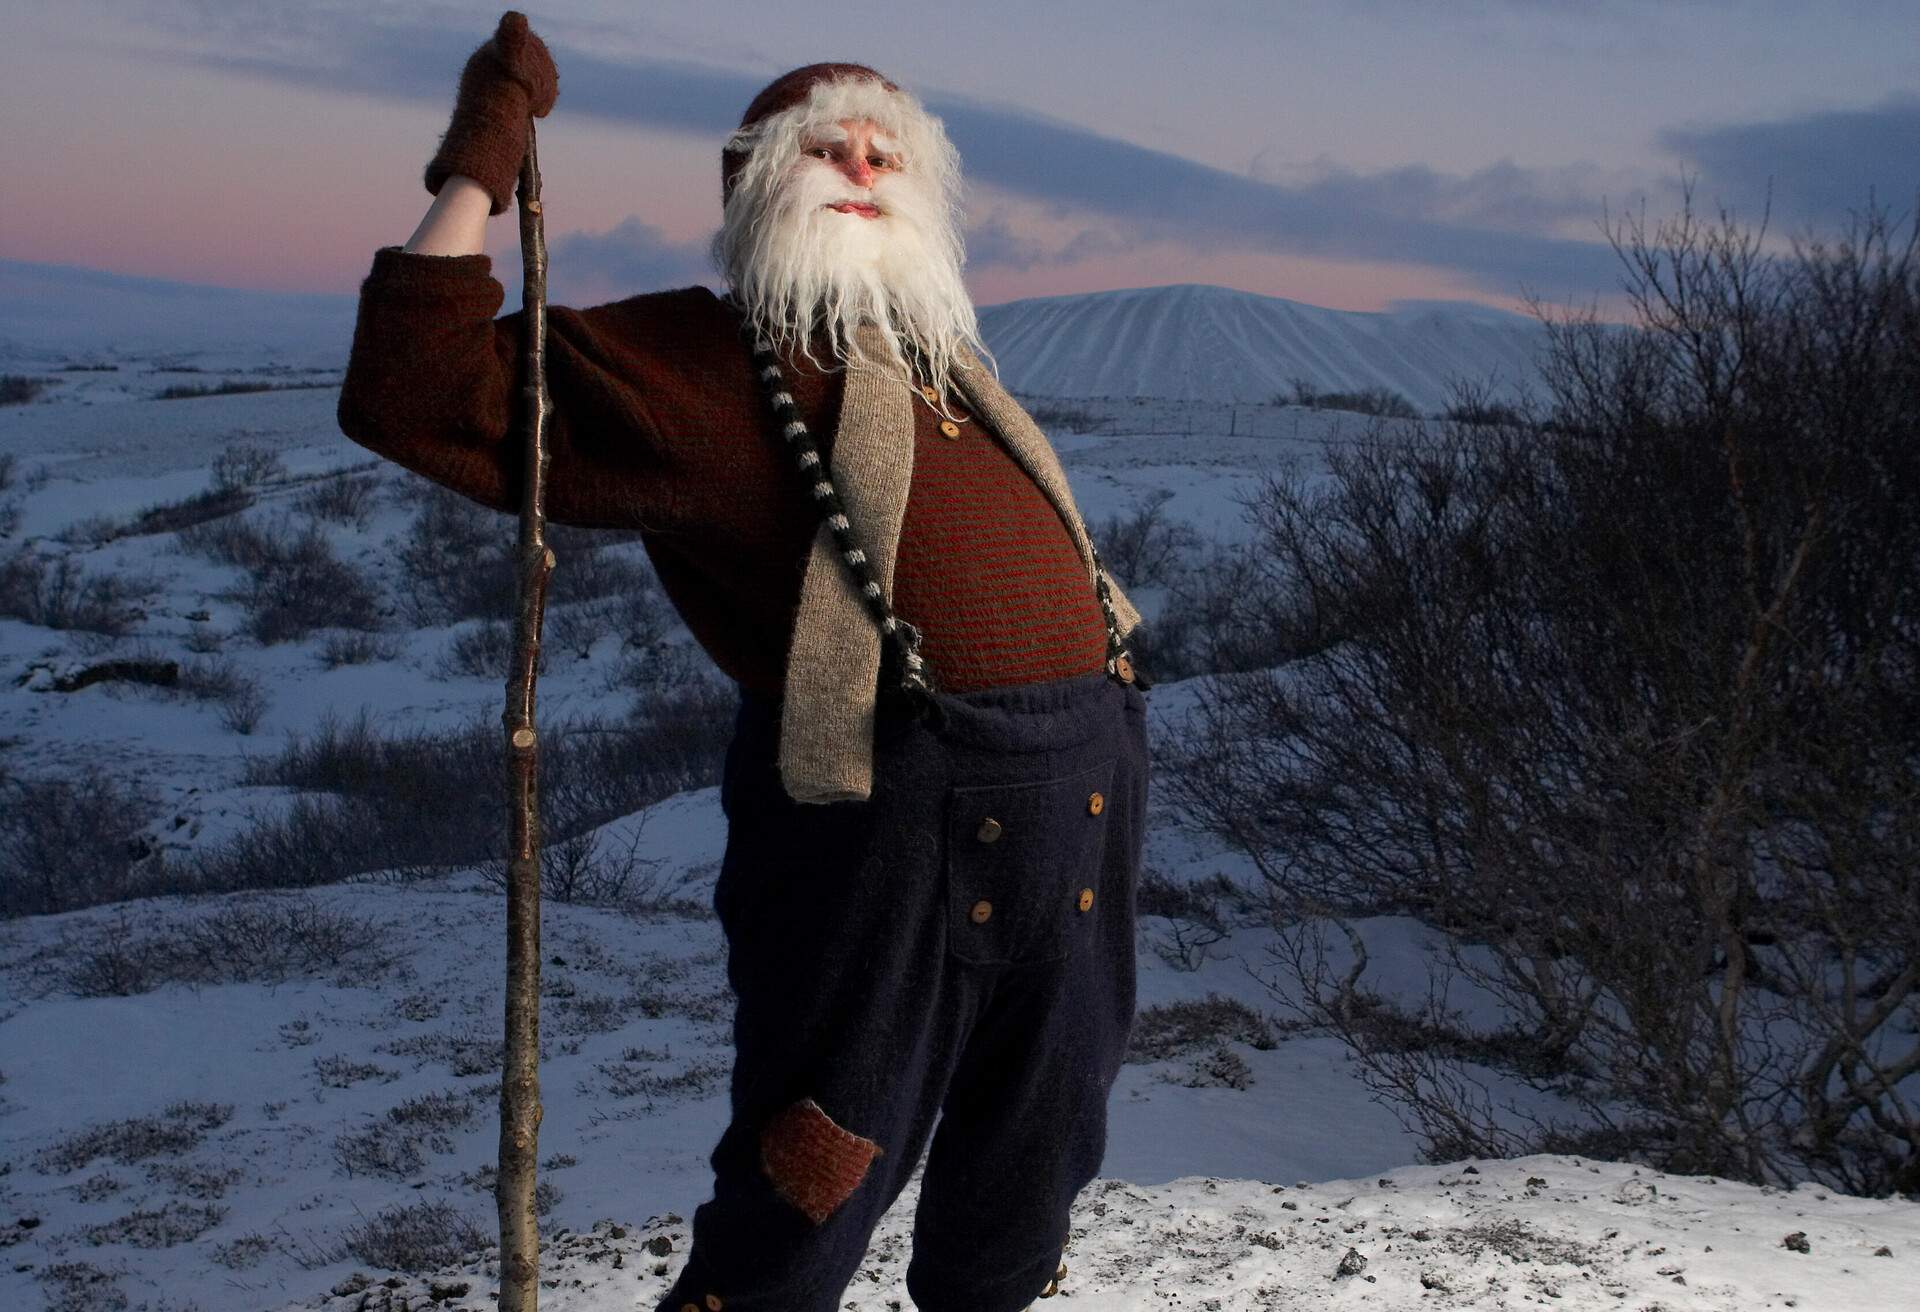 The Yule Lads or Yulemen are from Icelandic Folklore who in modern times have become the Icelands version of Santa Claus. Christmas tradition in Iceland tells of 13 prankster trolls known as Yule Lads who delight in spreading mayhem during the holiday season.